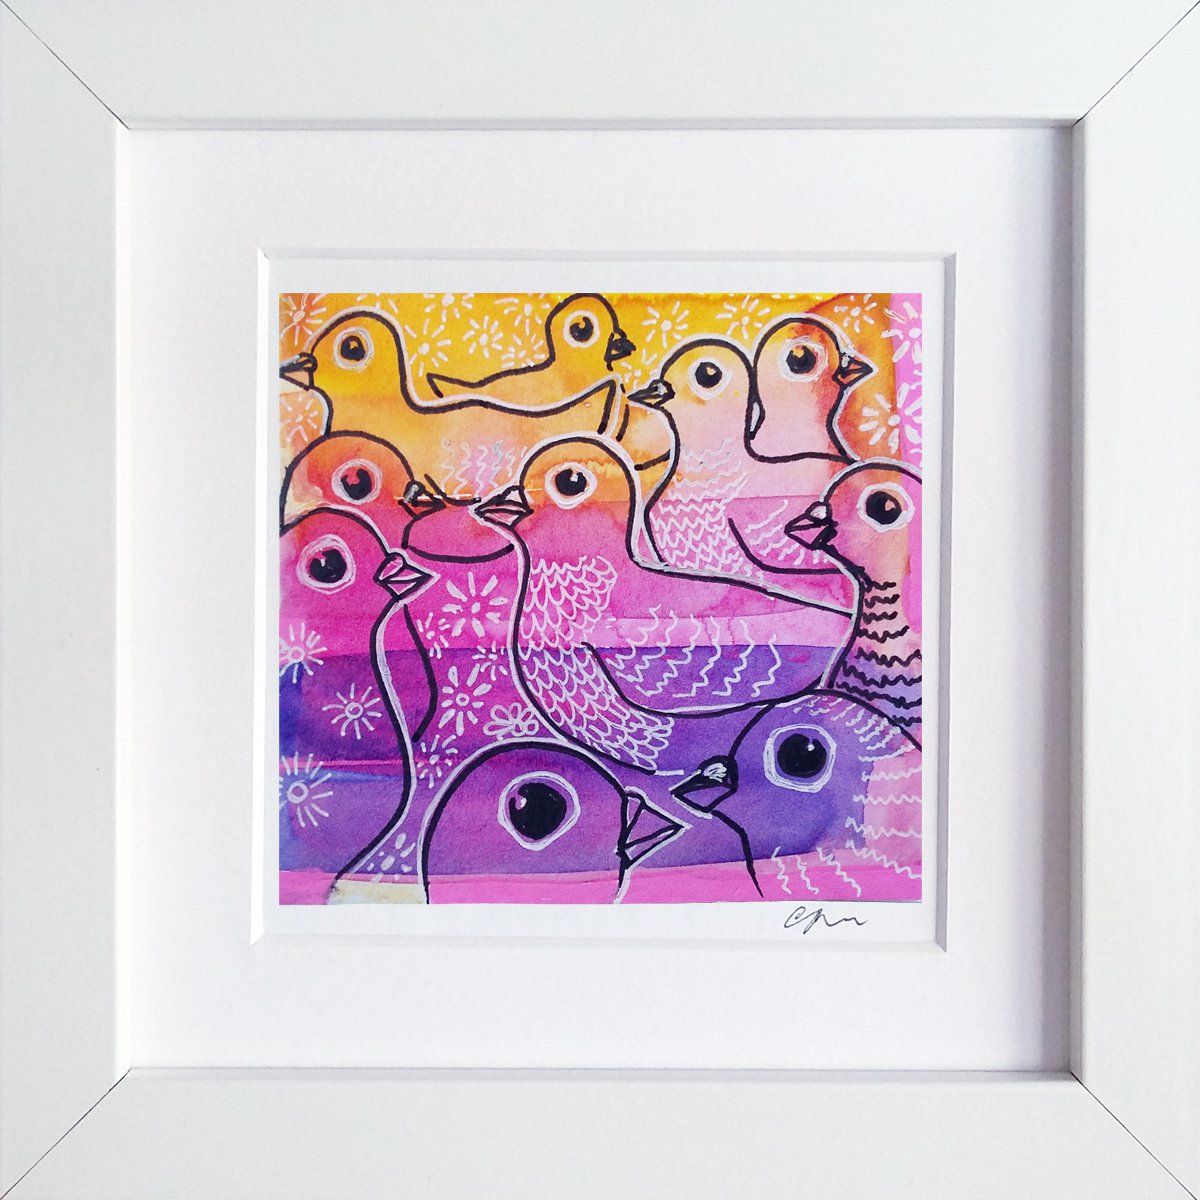 Feathered friends #2 (framed and ready to hang) by Carolynne Coulson